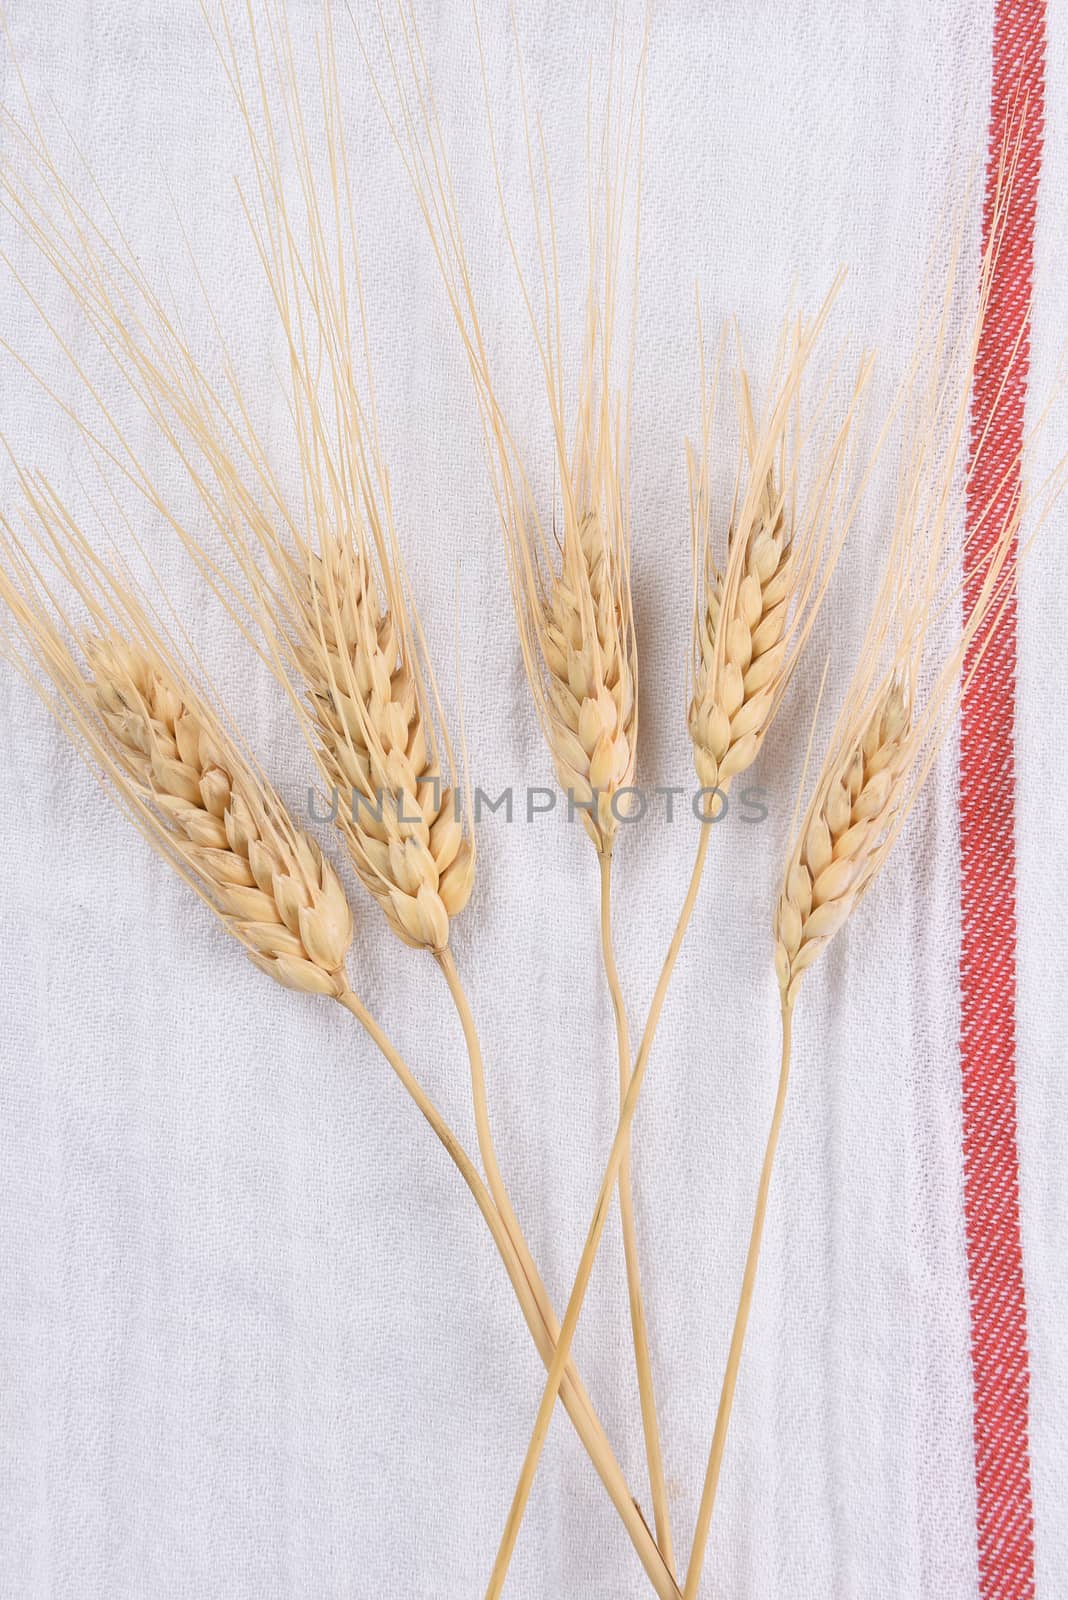 Wheat stalks on a white kitchen towel with red stripe.